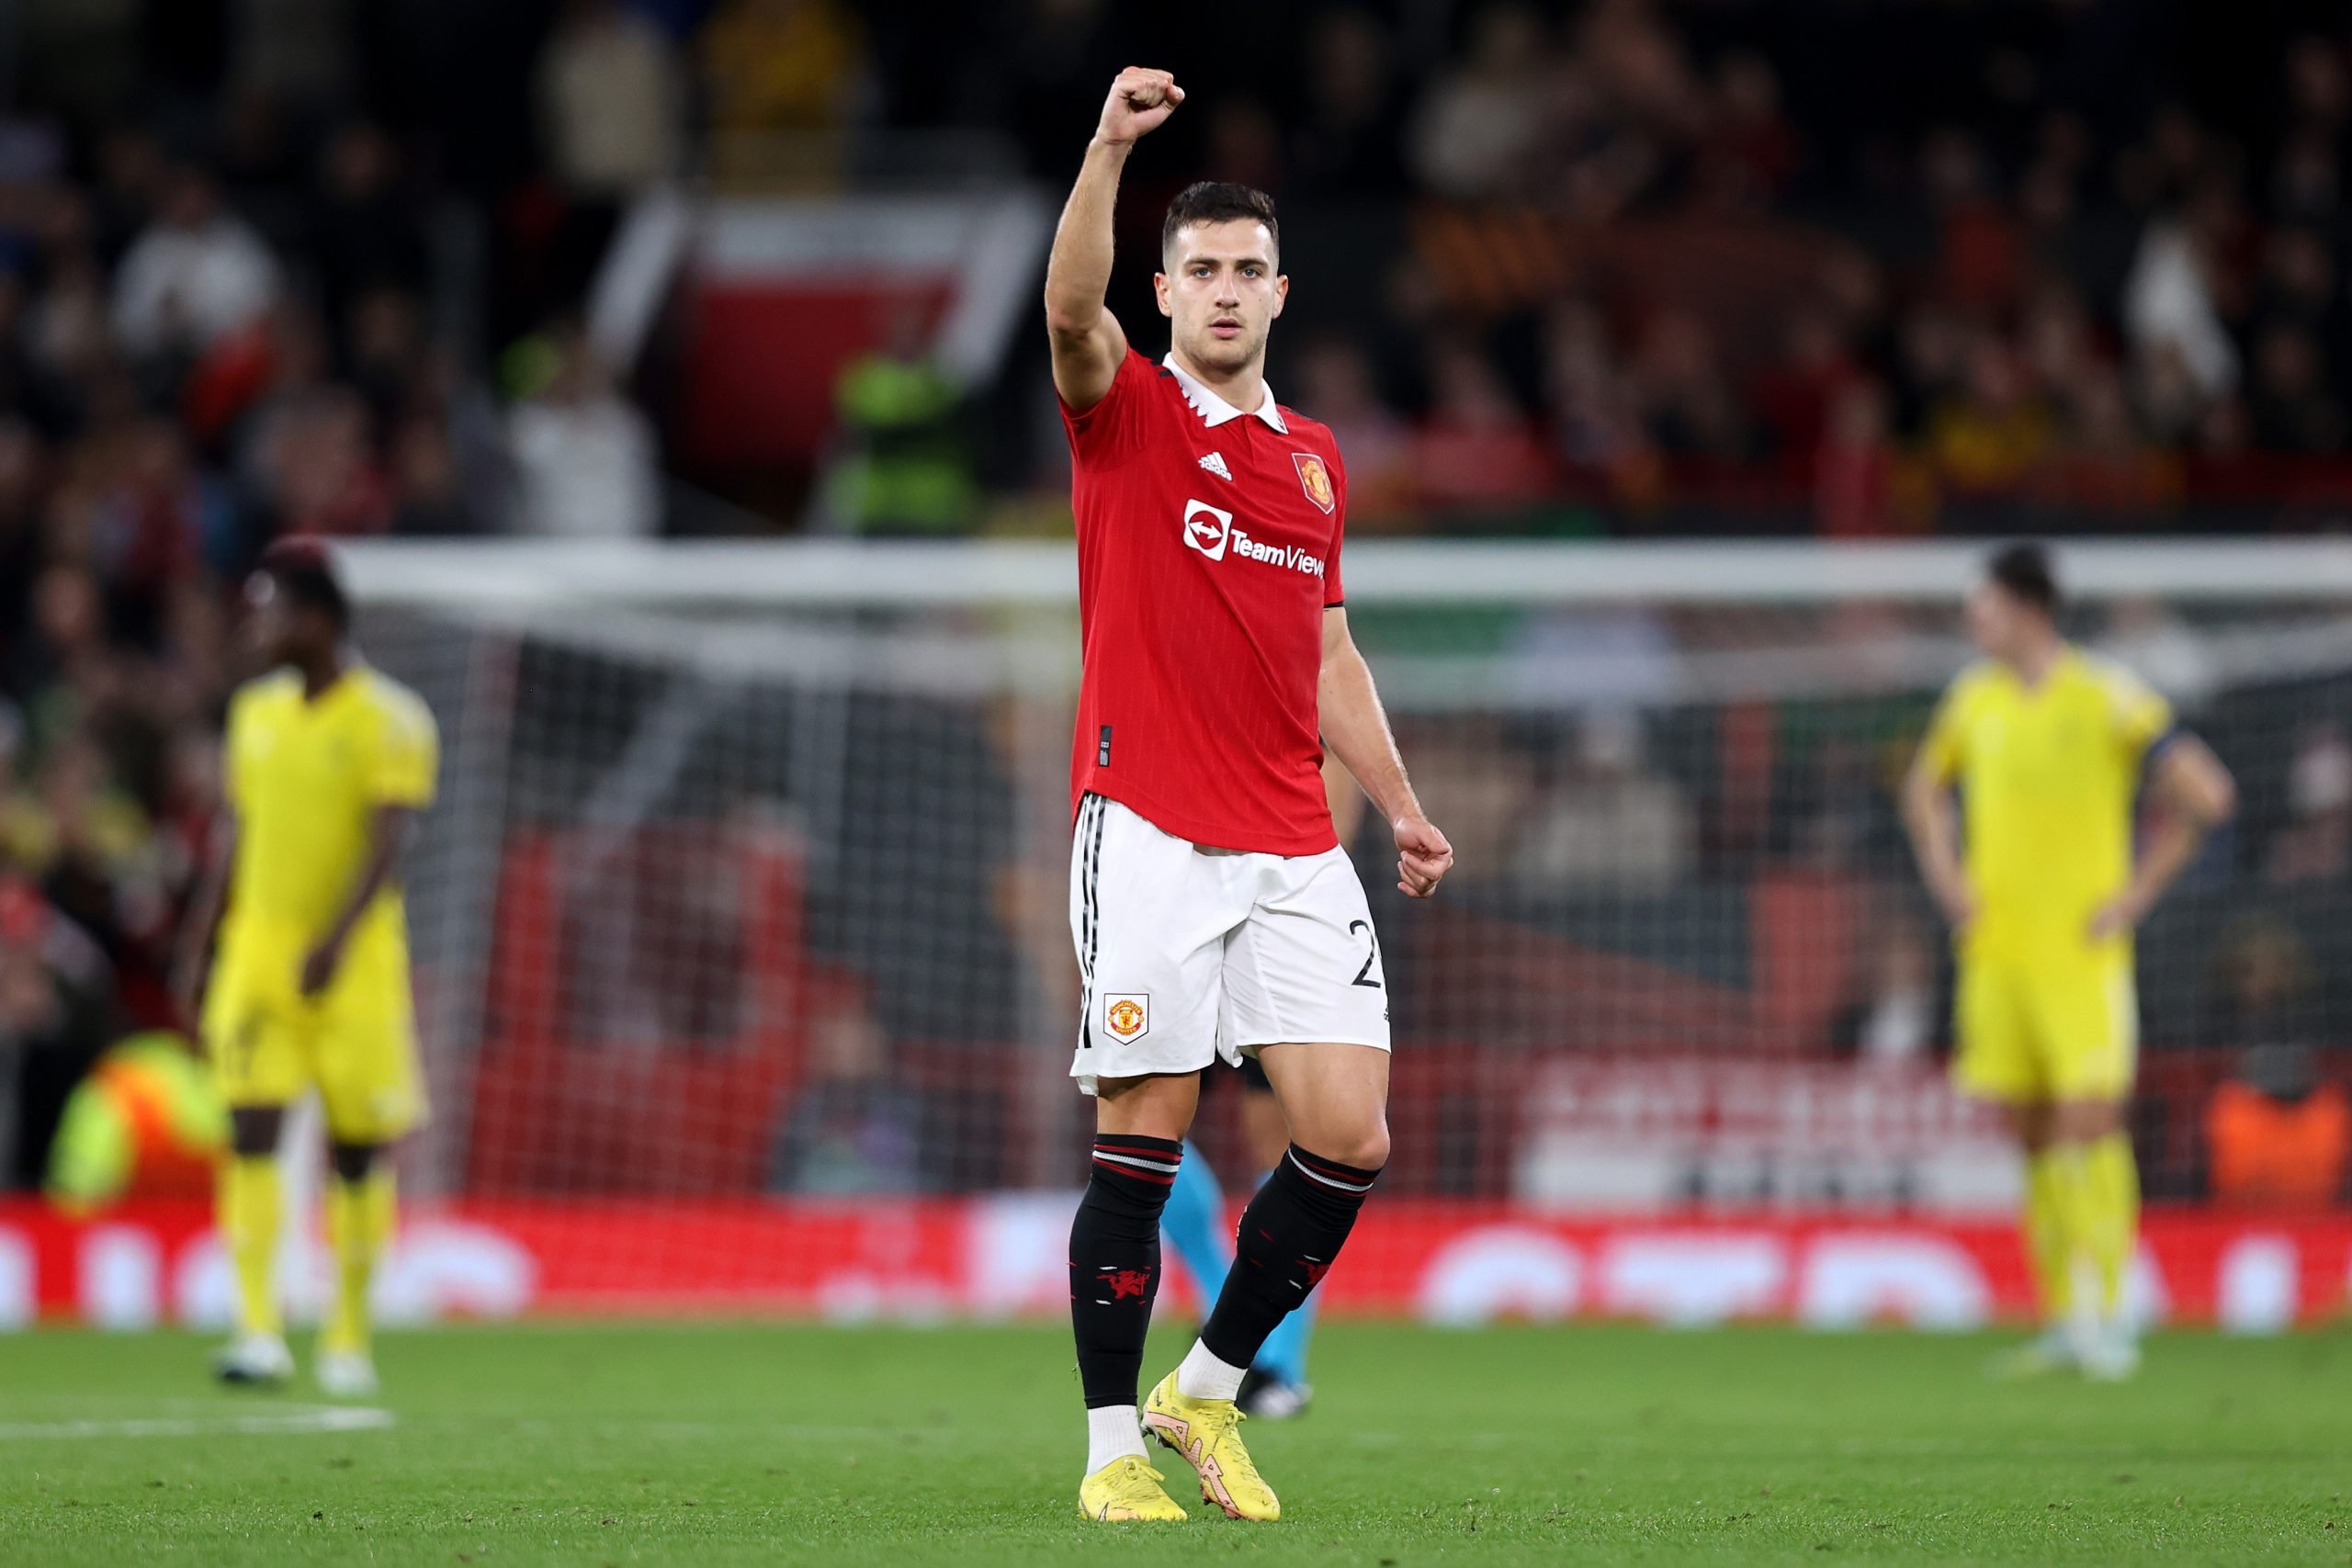 Diogo Dalot of Manchester United. (Photo by Naomi Baker/Getty Images)